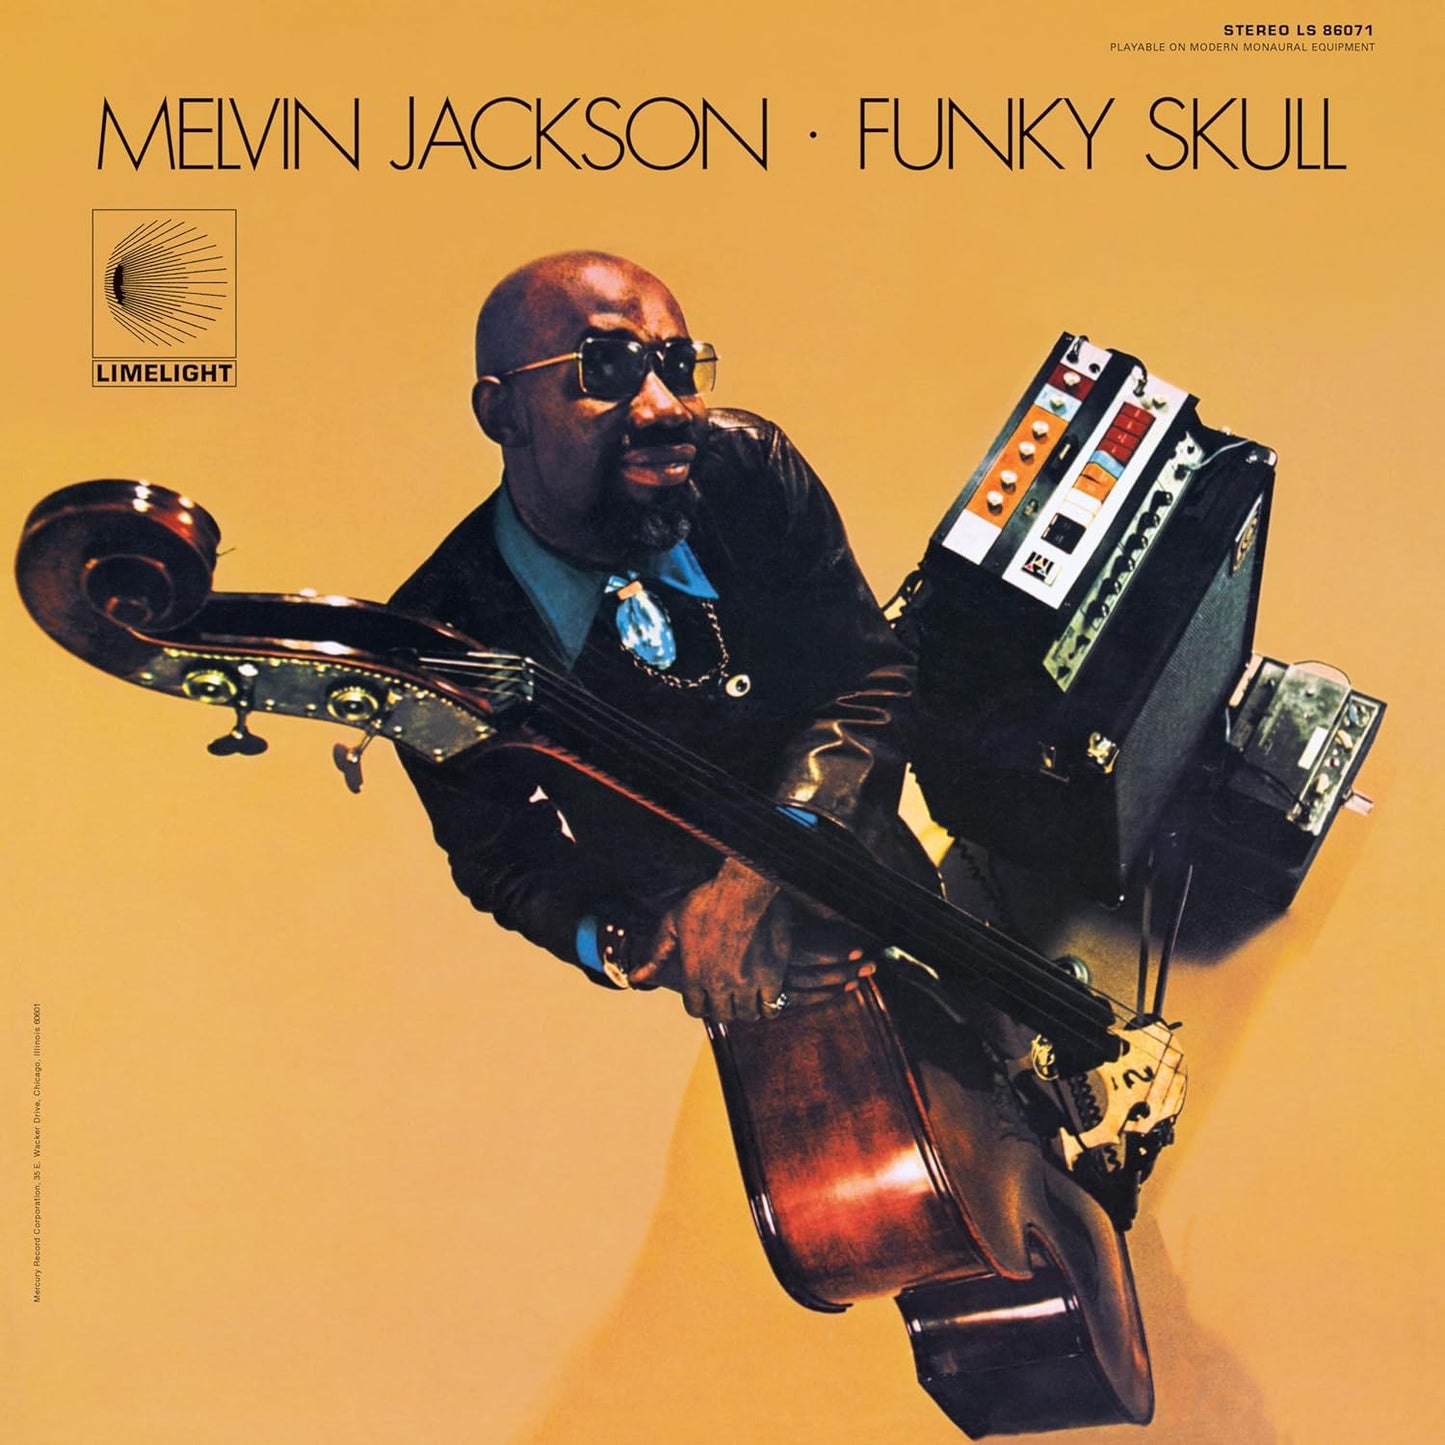 LP - Melvin Jackson - Funky Skull (Verve By Request)